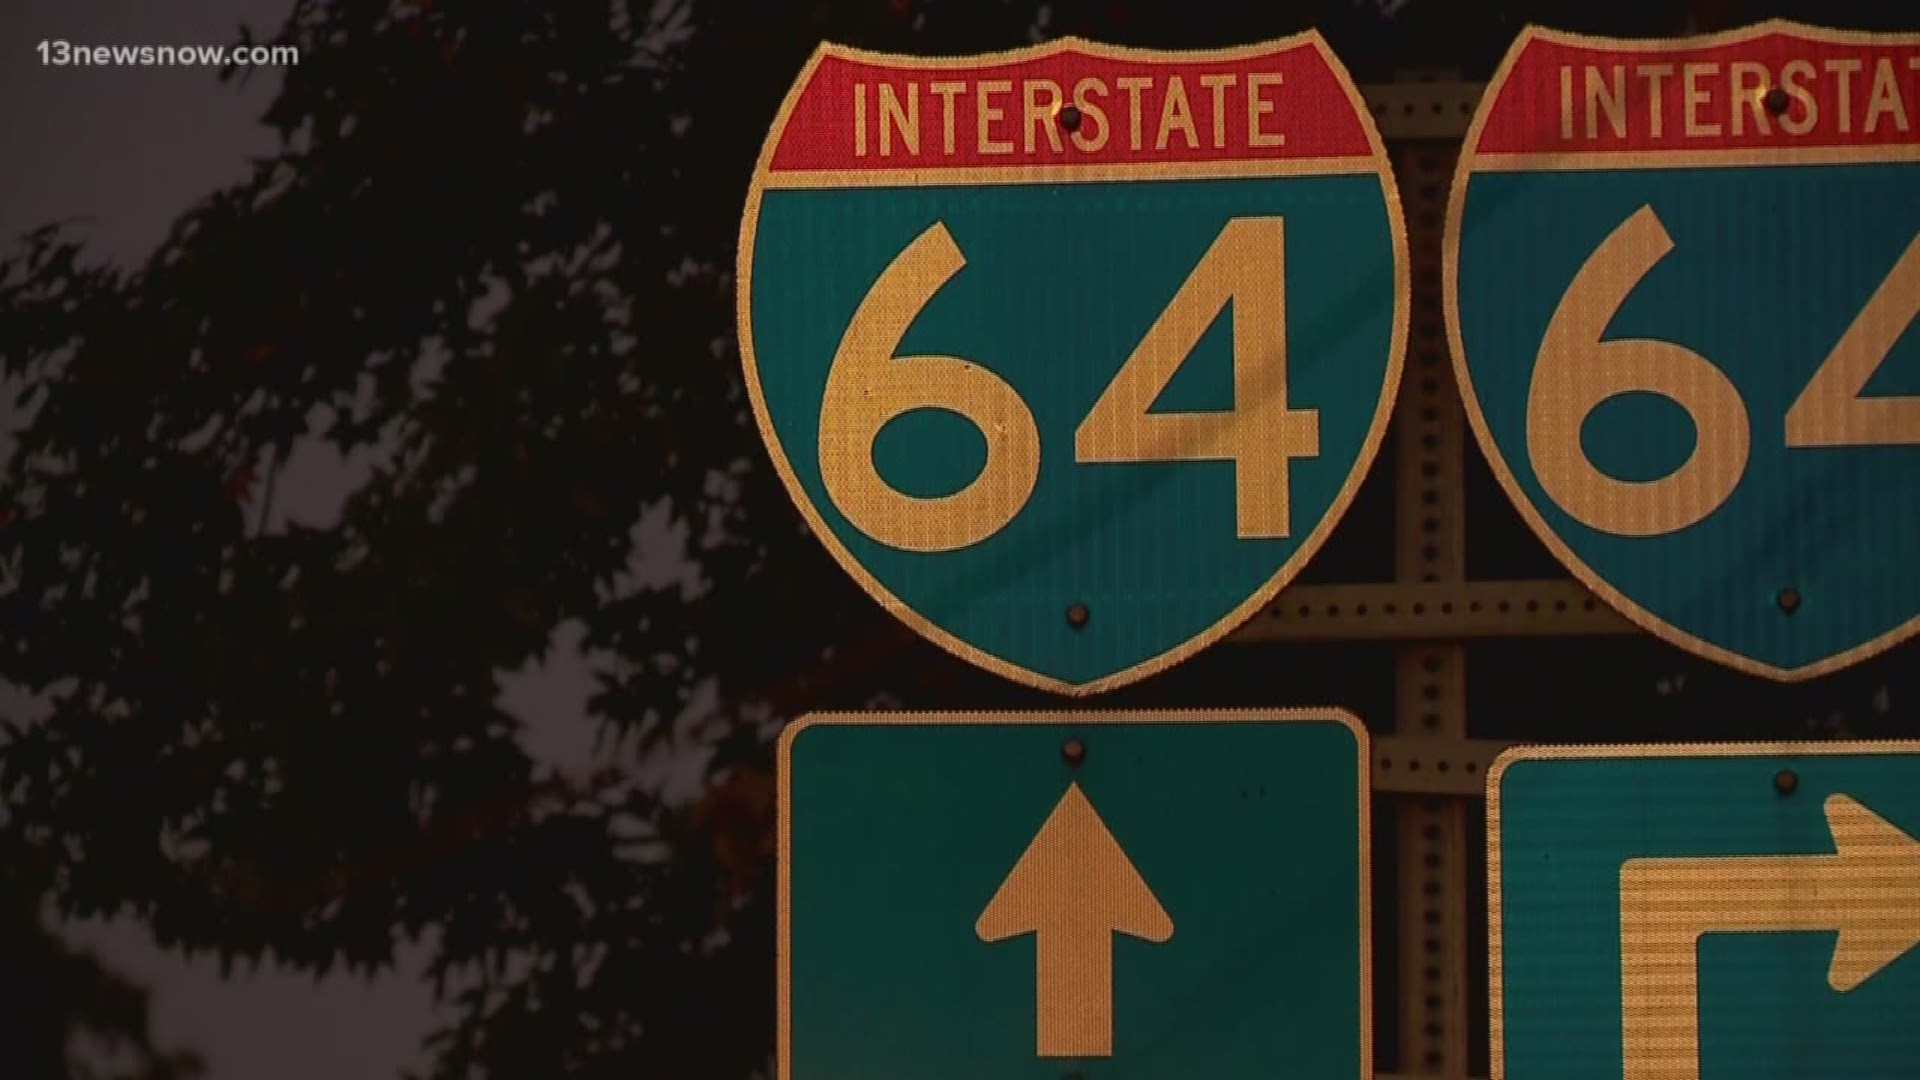 A new potential plan from state officials might mean new toll lanes to alleviate traffic on Interstate 64.